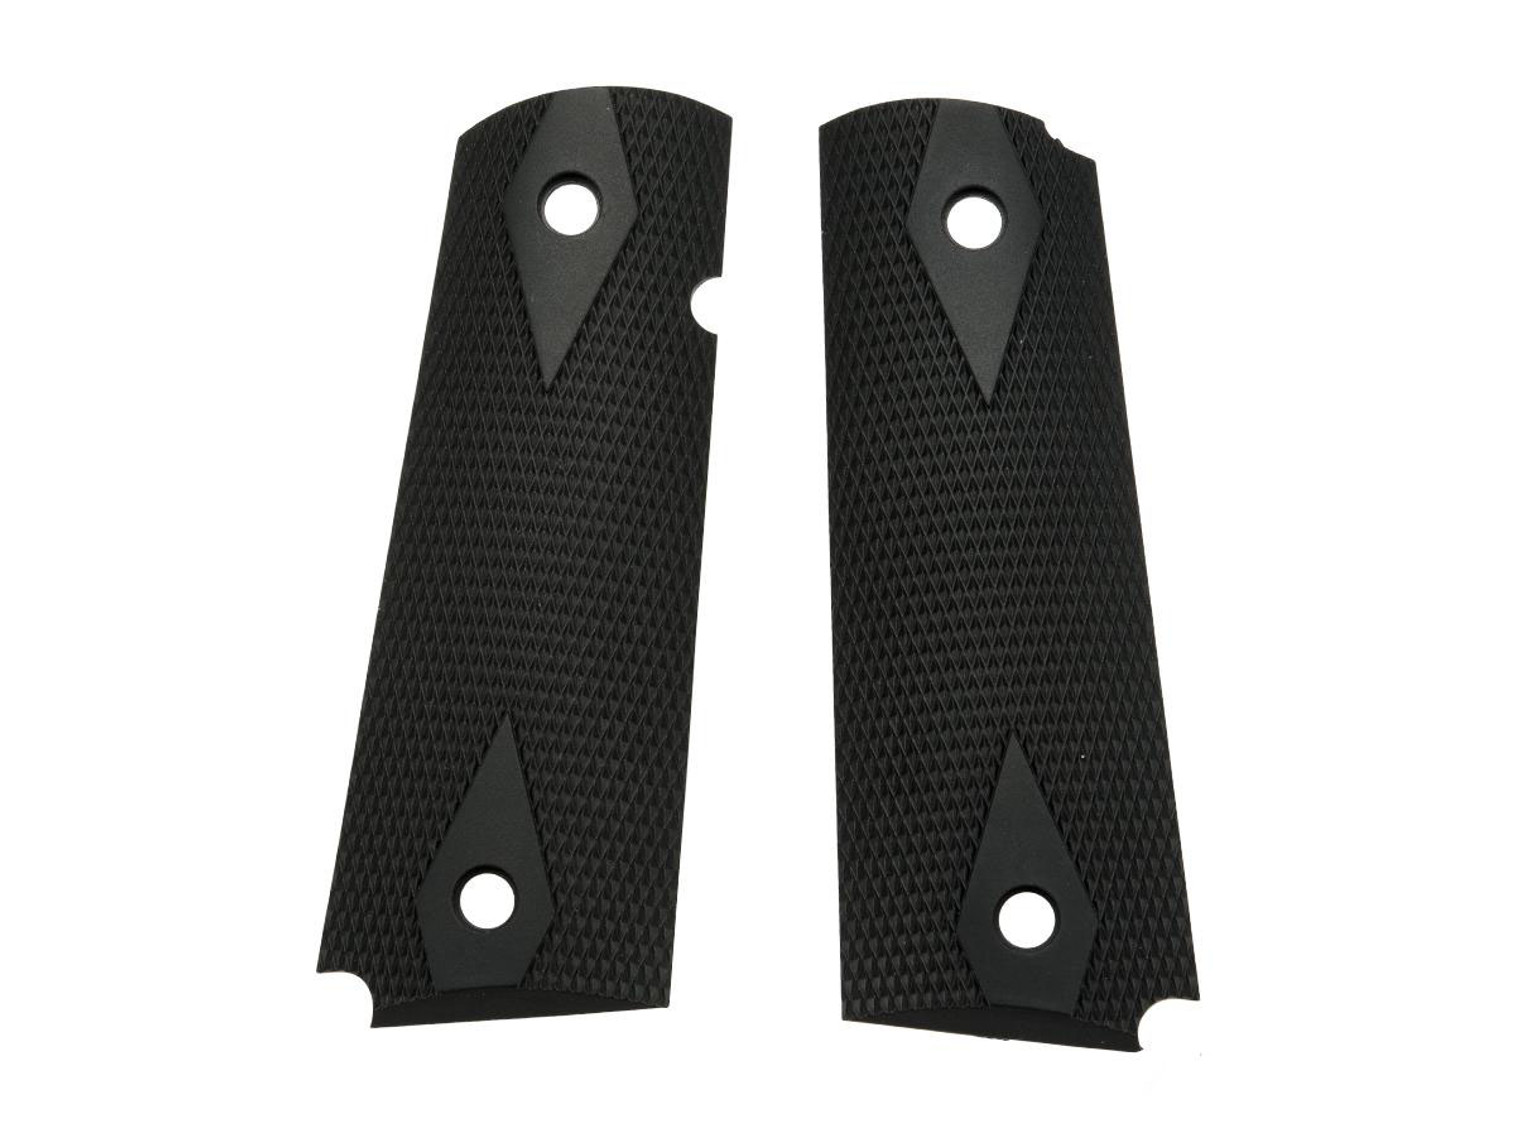 OEM Factory Grip Panel Set for KWA Mark I and MK III / 1911 series GBB Gas Blowback Pistols